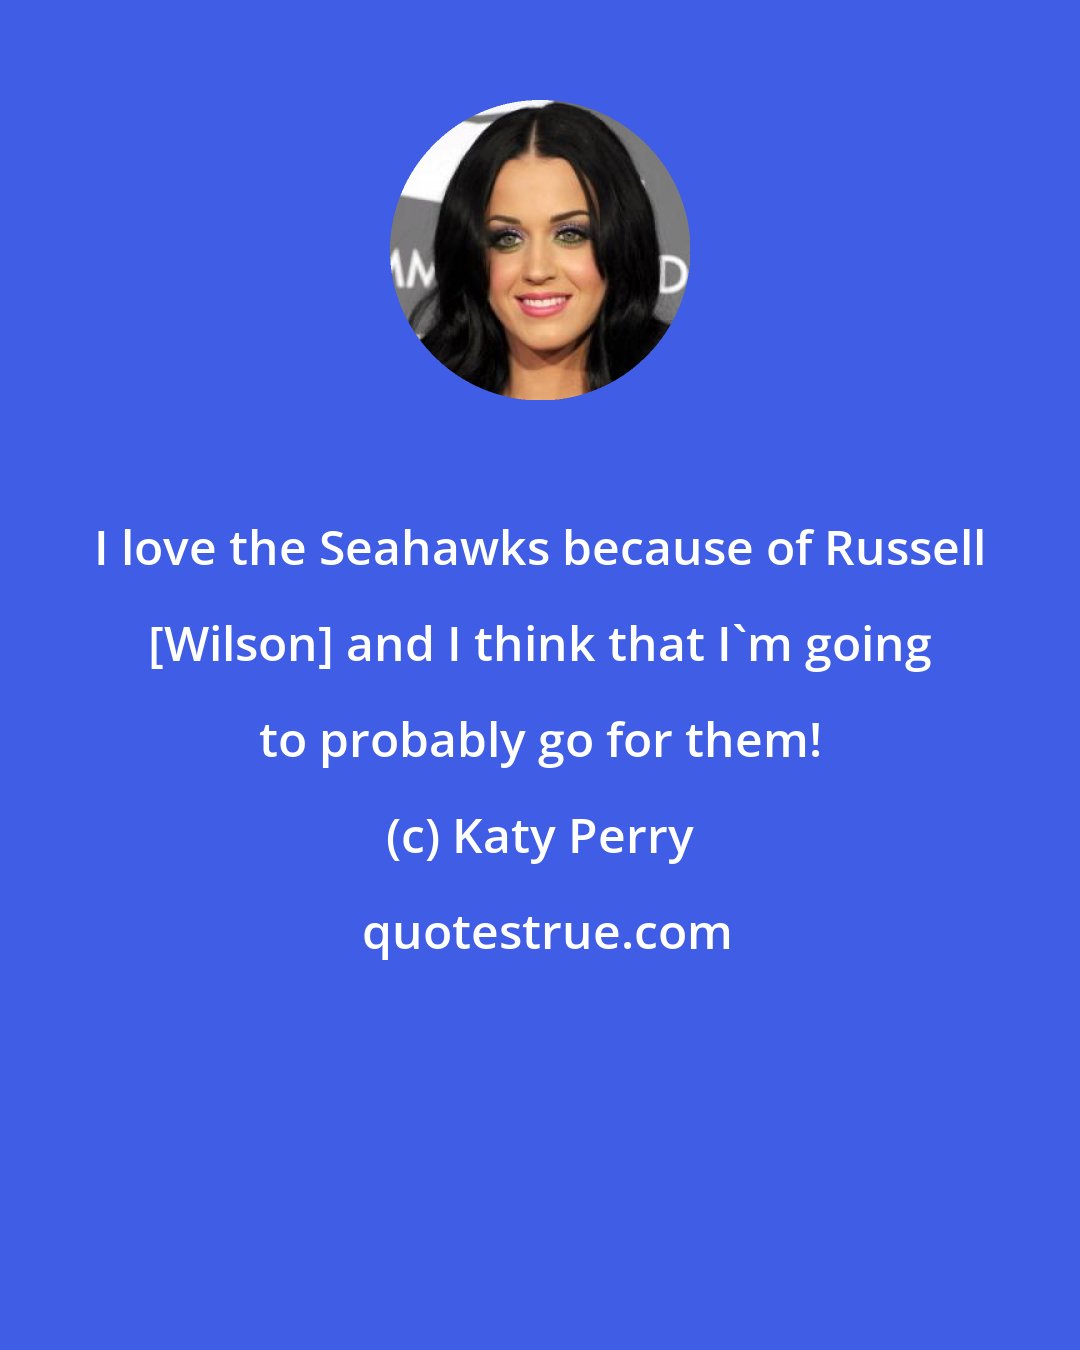 Katy Perry: I love the Seahawks because of Russell [Wilson] and I think that I'm going to probably go for them!